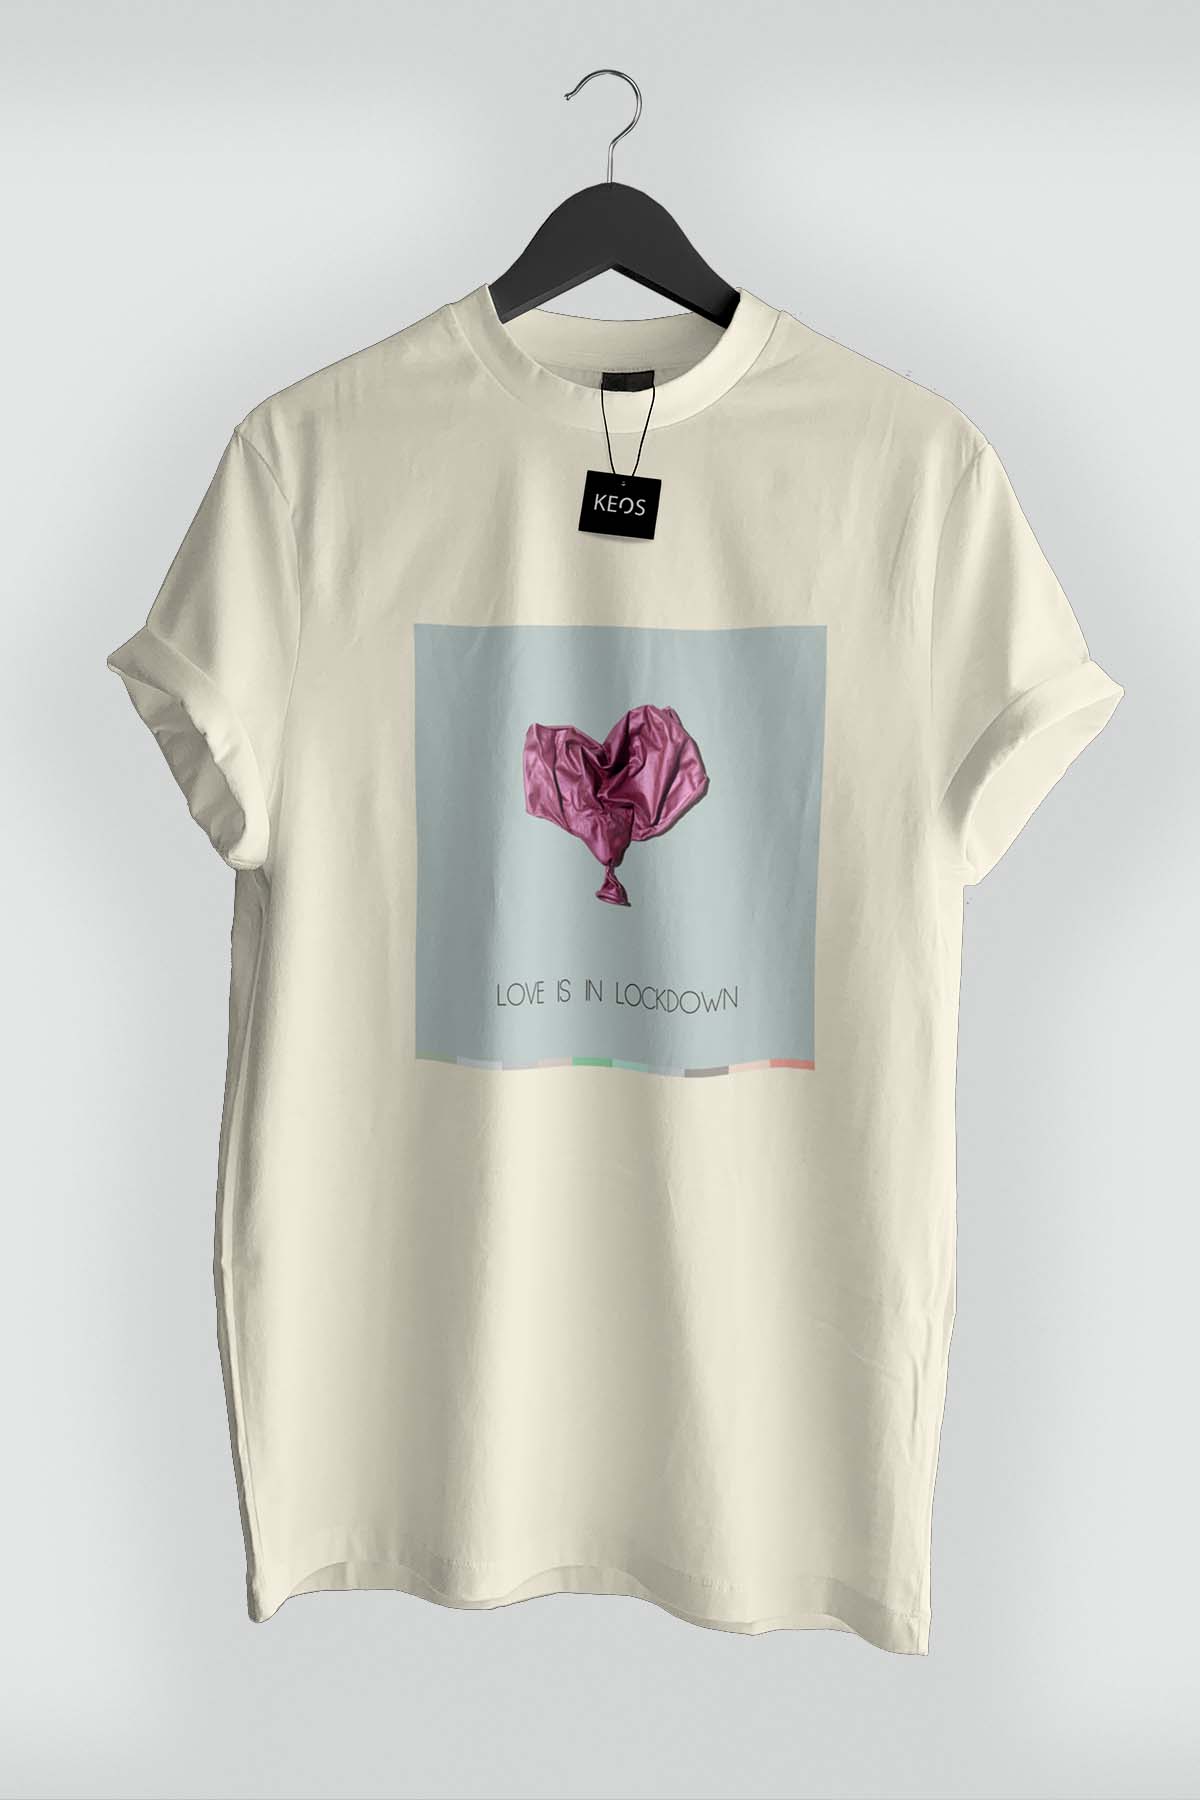 Love is in Lockdown Organic Cotton T-shirt - keos.life